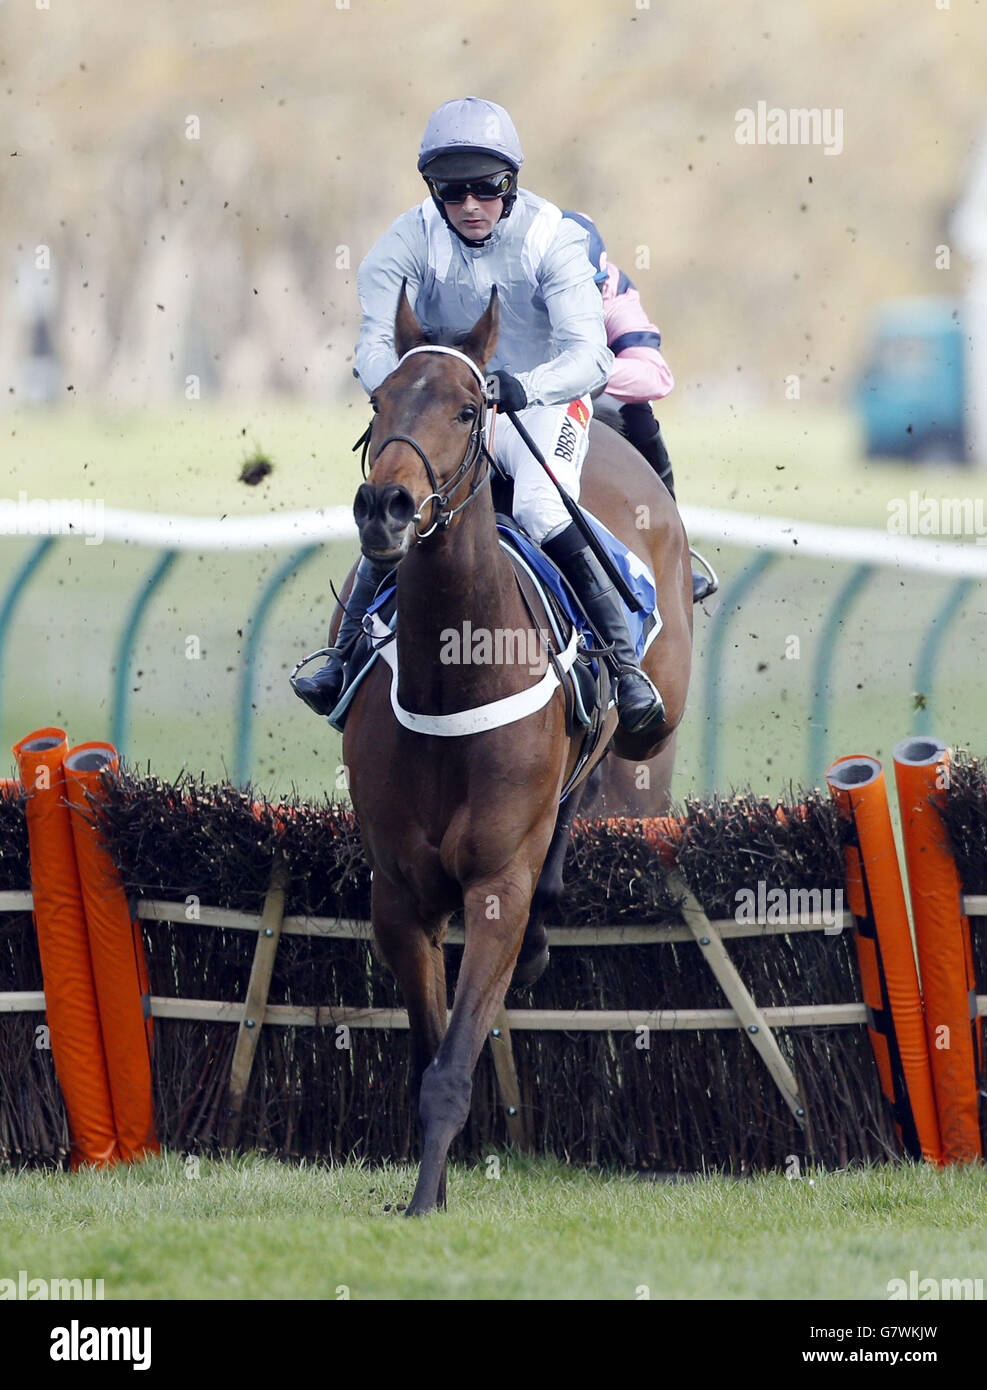 Different Gravey ridden by jockey Nico de Boinville wins the West Sound Novices' Hurdle Race during the 2015 Coral Scottish Grand National Festival at Ayr Racecourse. Stock Photo